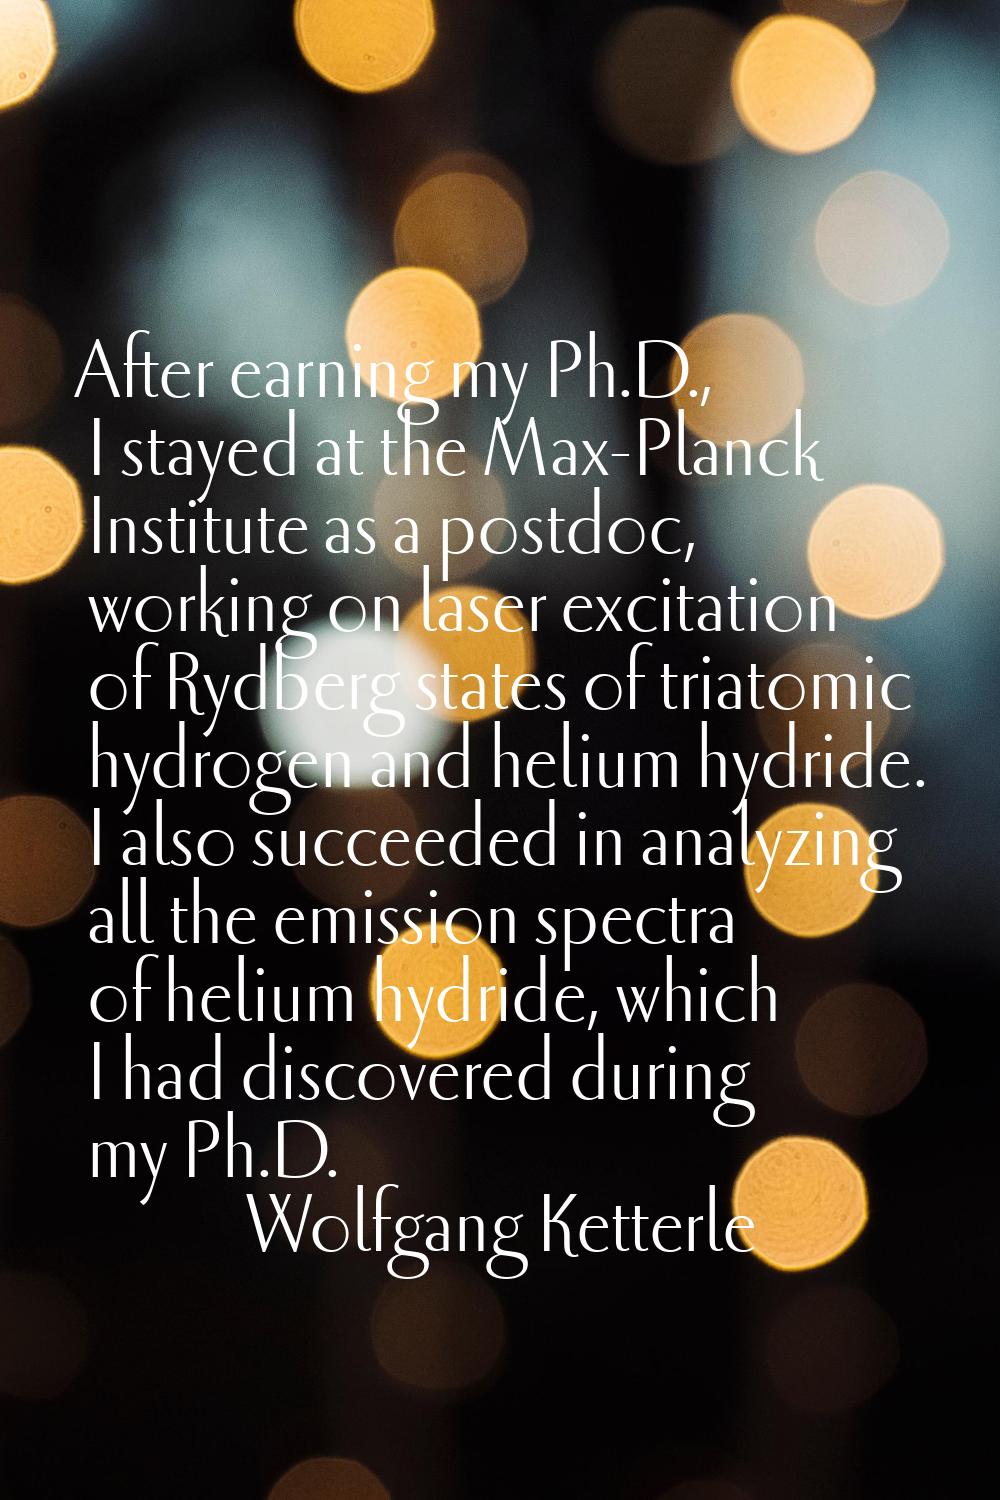 After earning my Ph.D., I stayed at the Max-Planck Institute as a postdoc, working on laser excitat